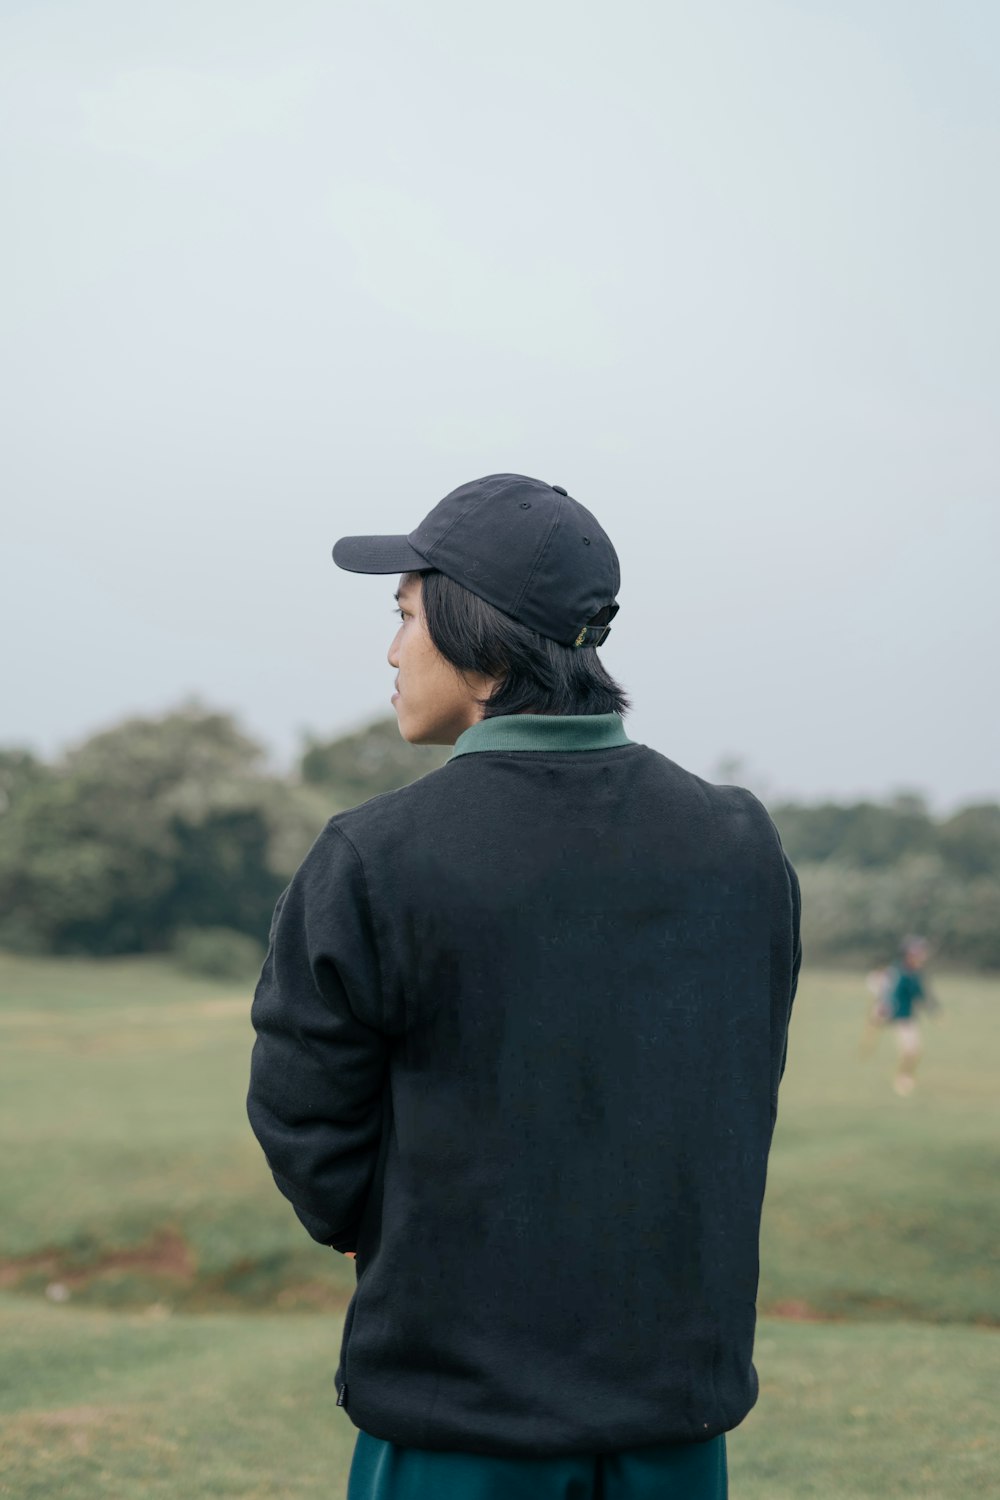 a person standing in a field with a baseball cap on